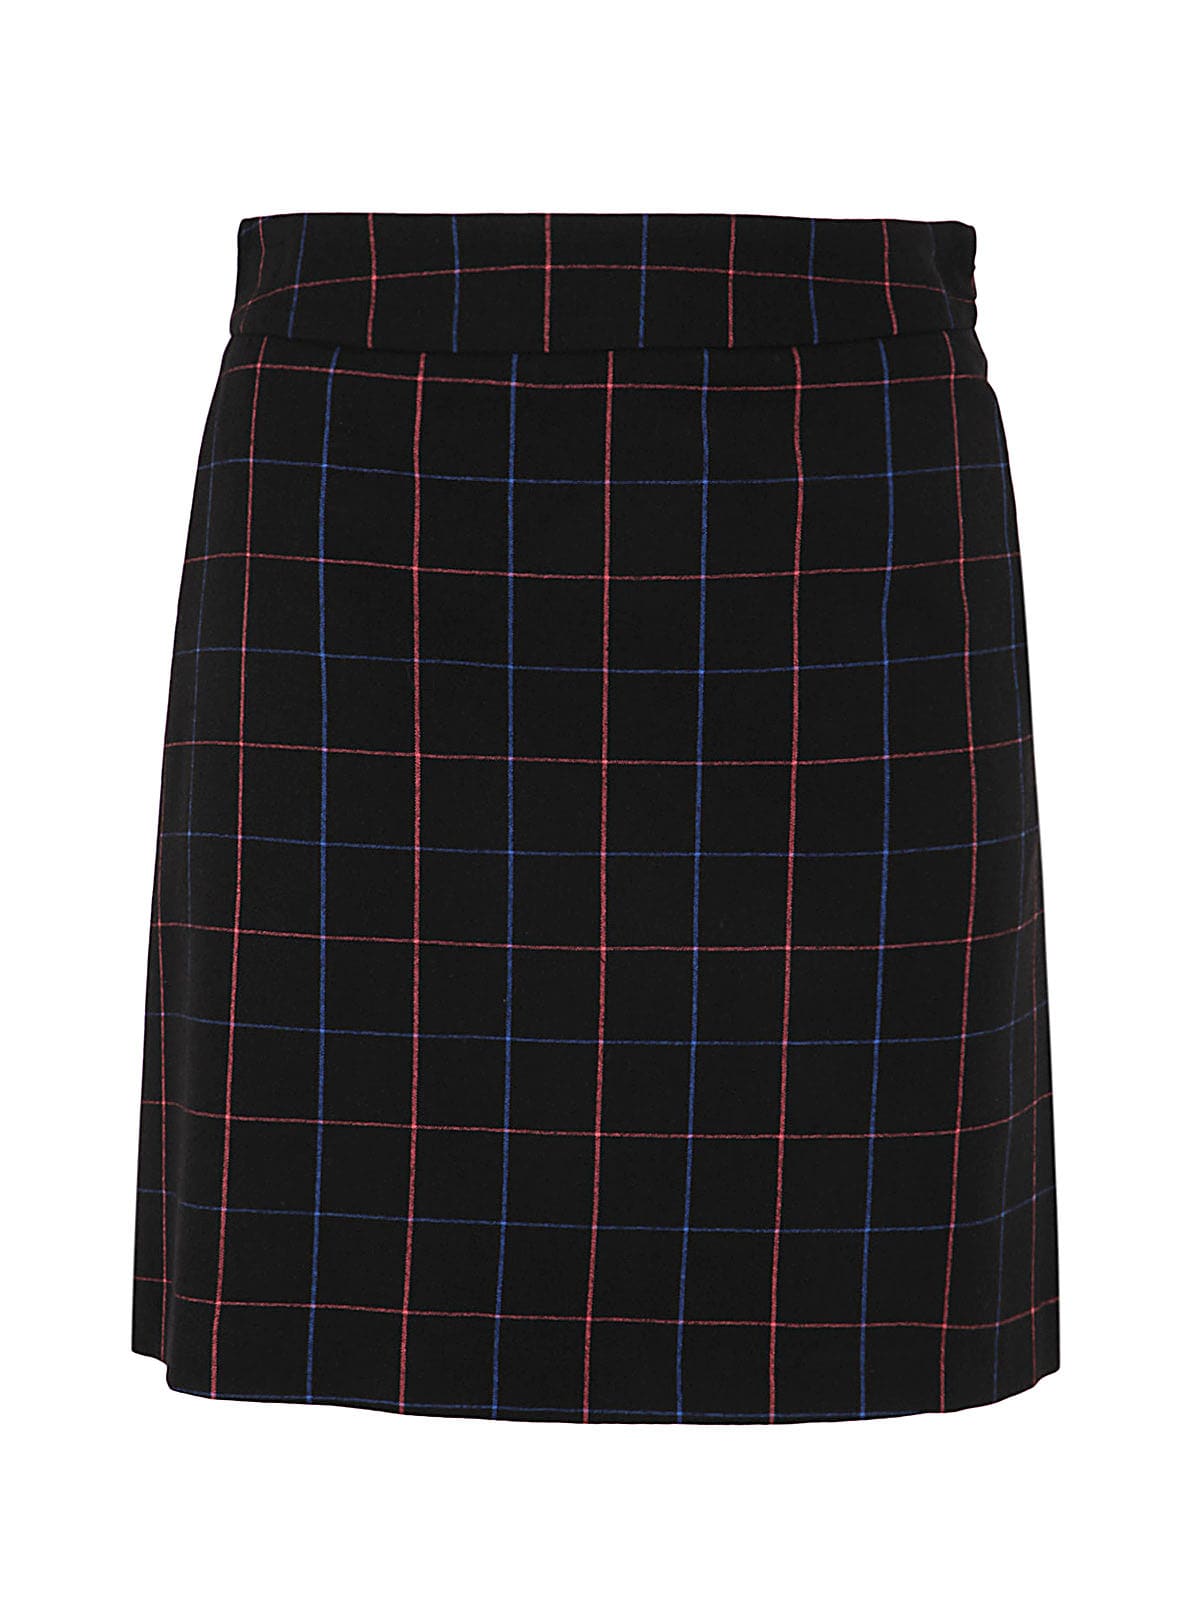 PS by Paul Smith Womens Skirt